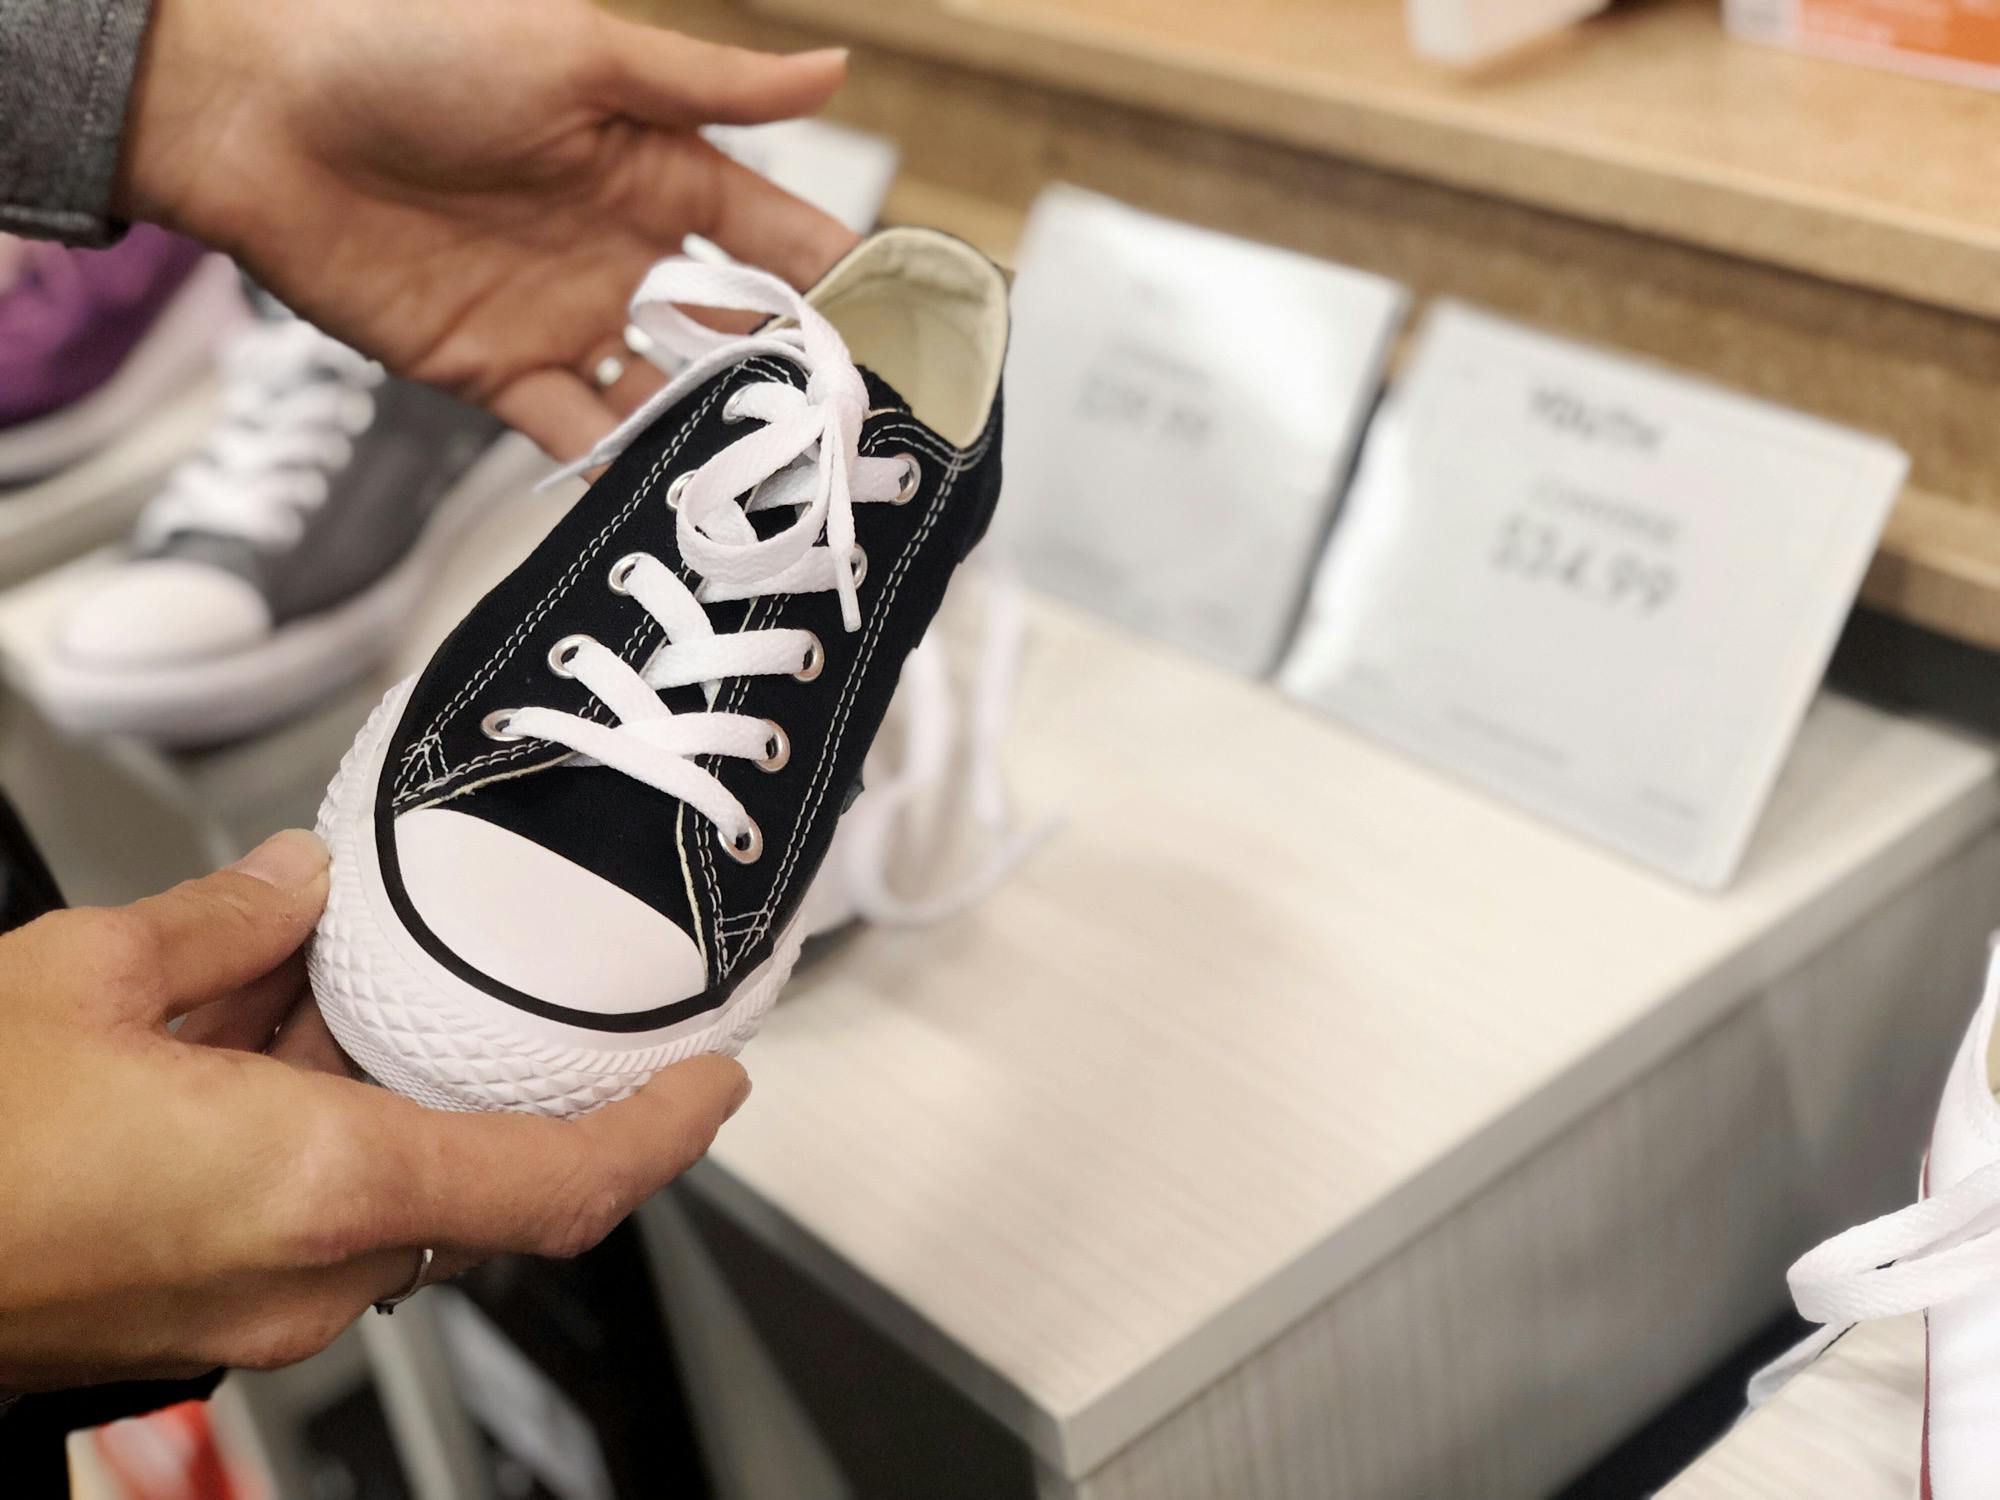 15 Converse Sales Tips To Get All The Deals - The Krazy